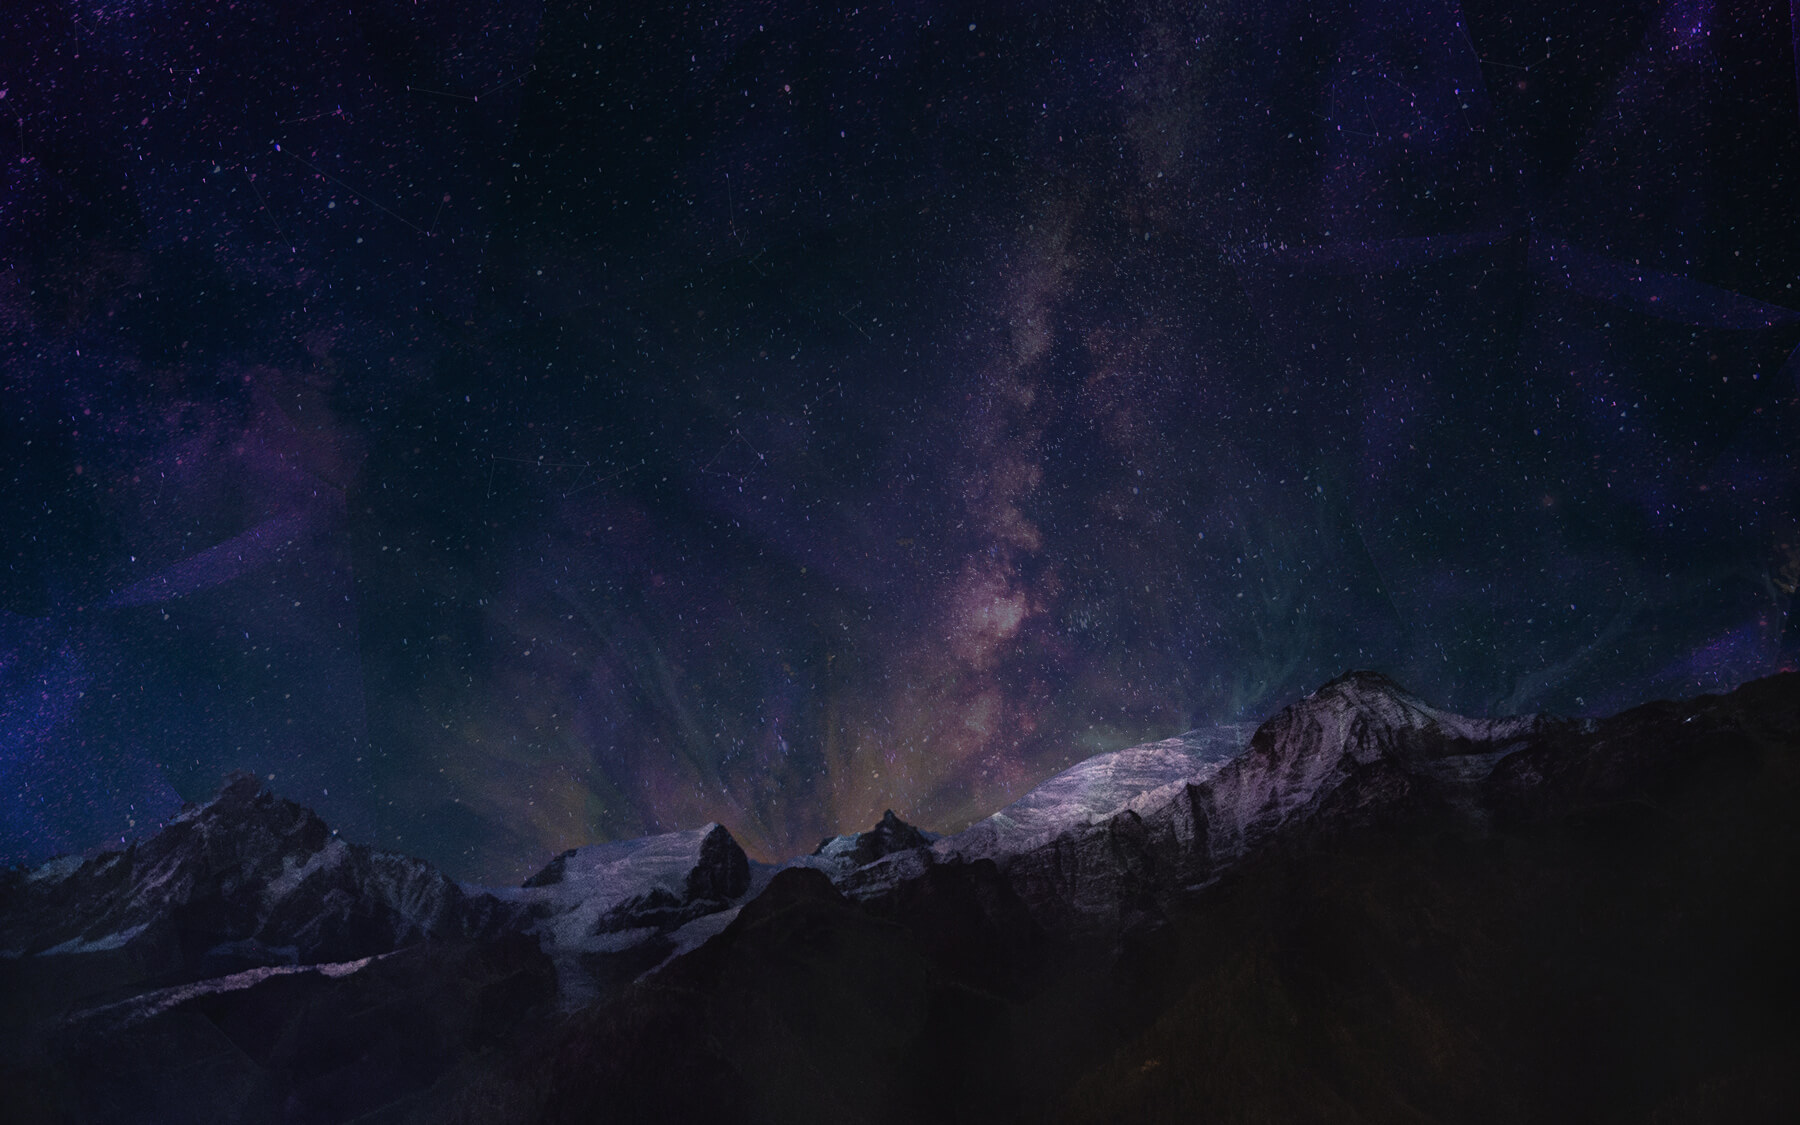 WebCull homepage starry night background with a mountain ridge